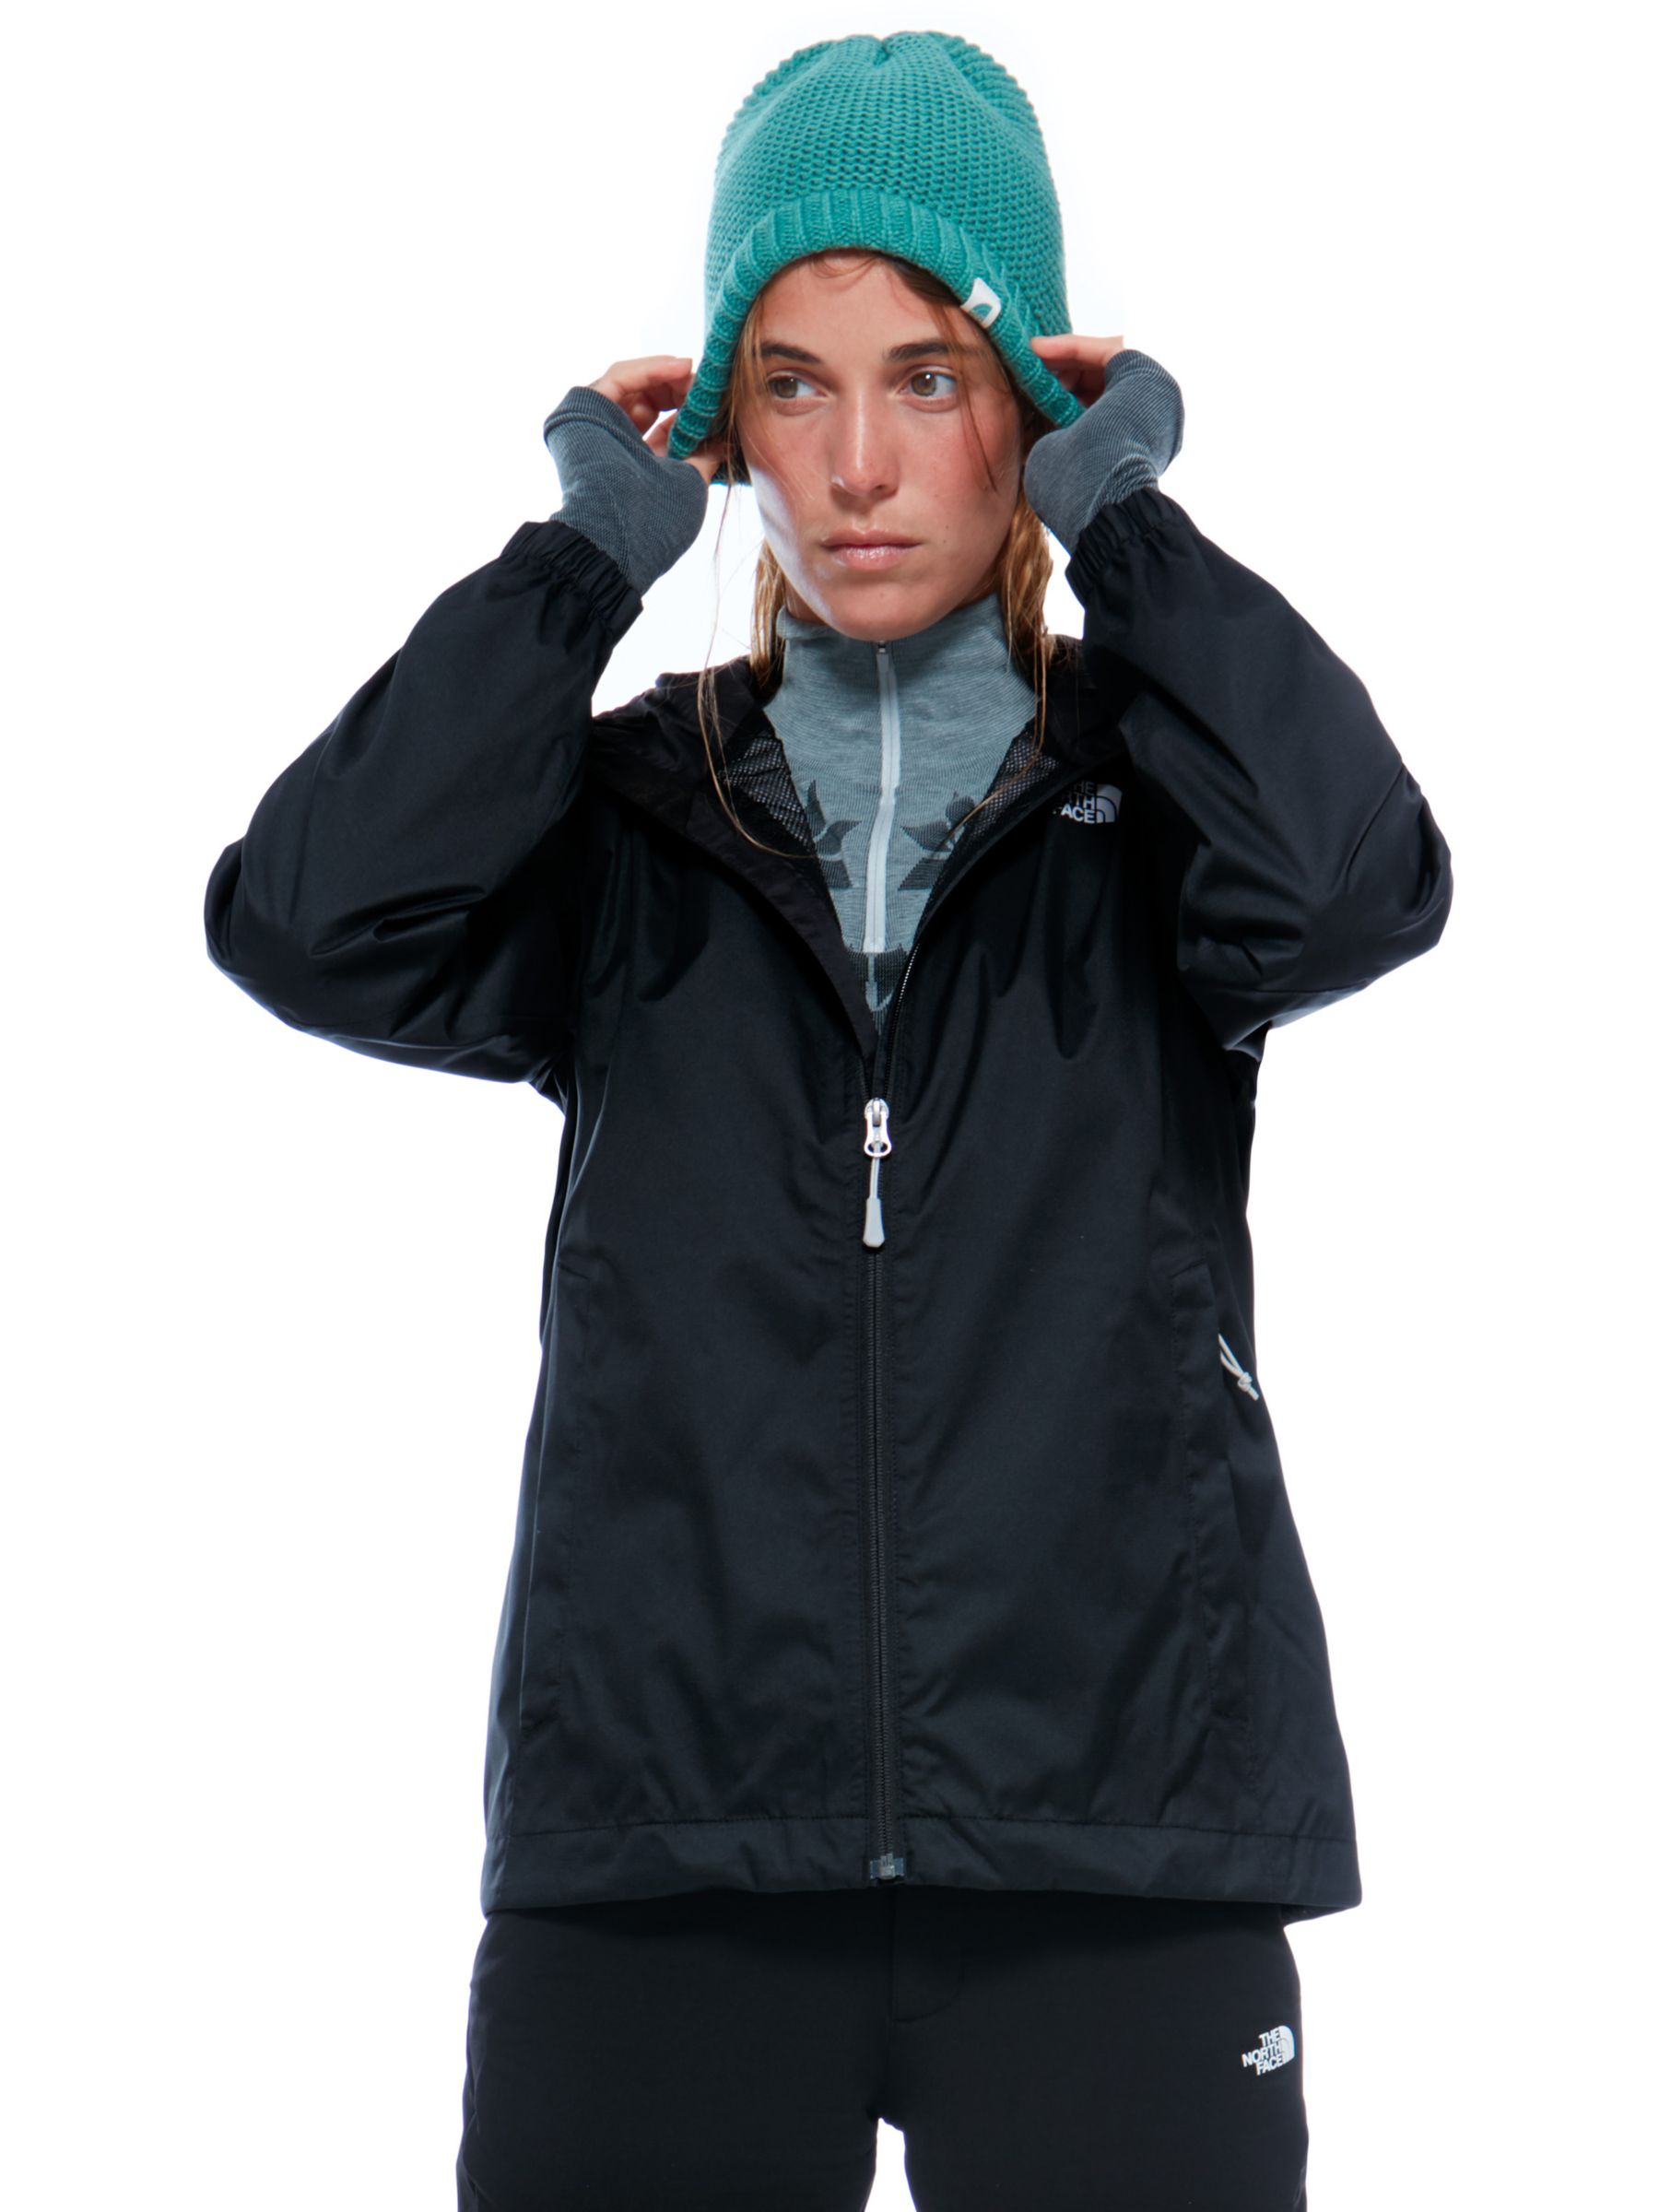 The North Face Quest Women's Waterproof Jacket, Black, S